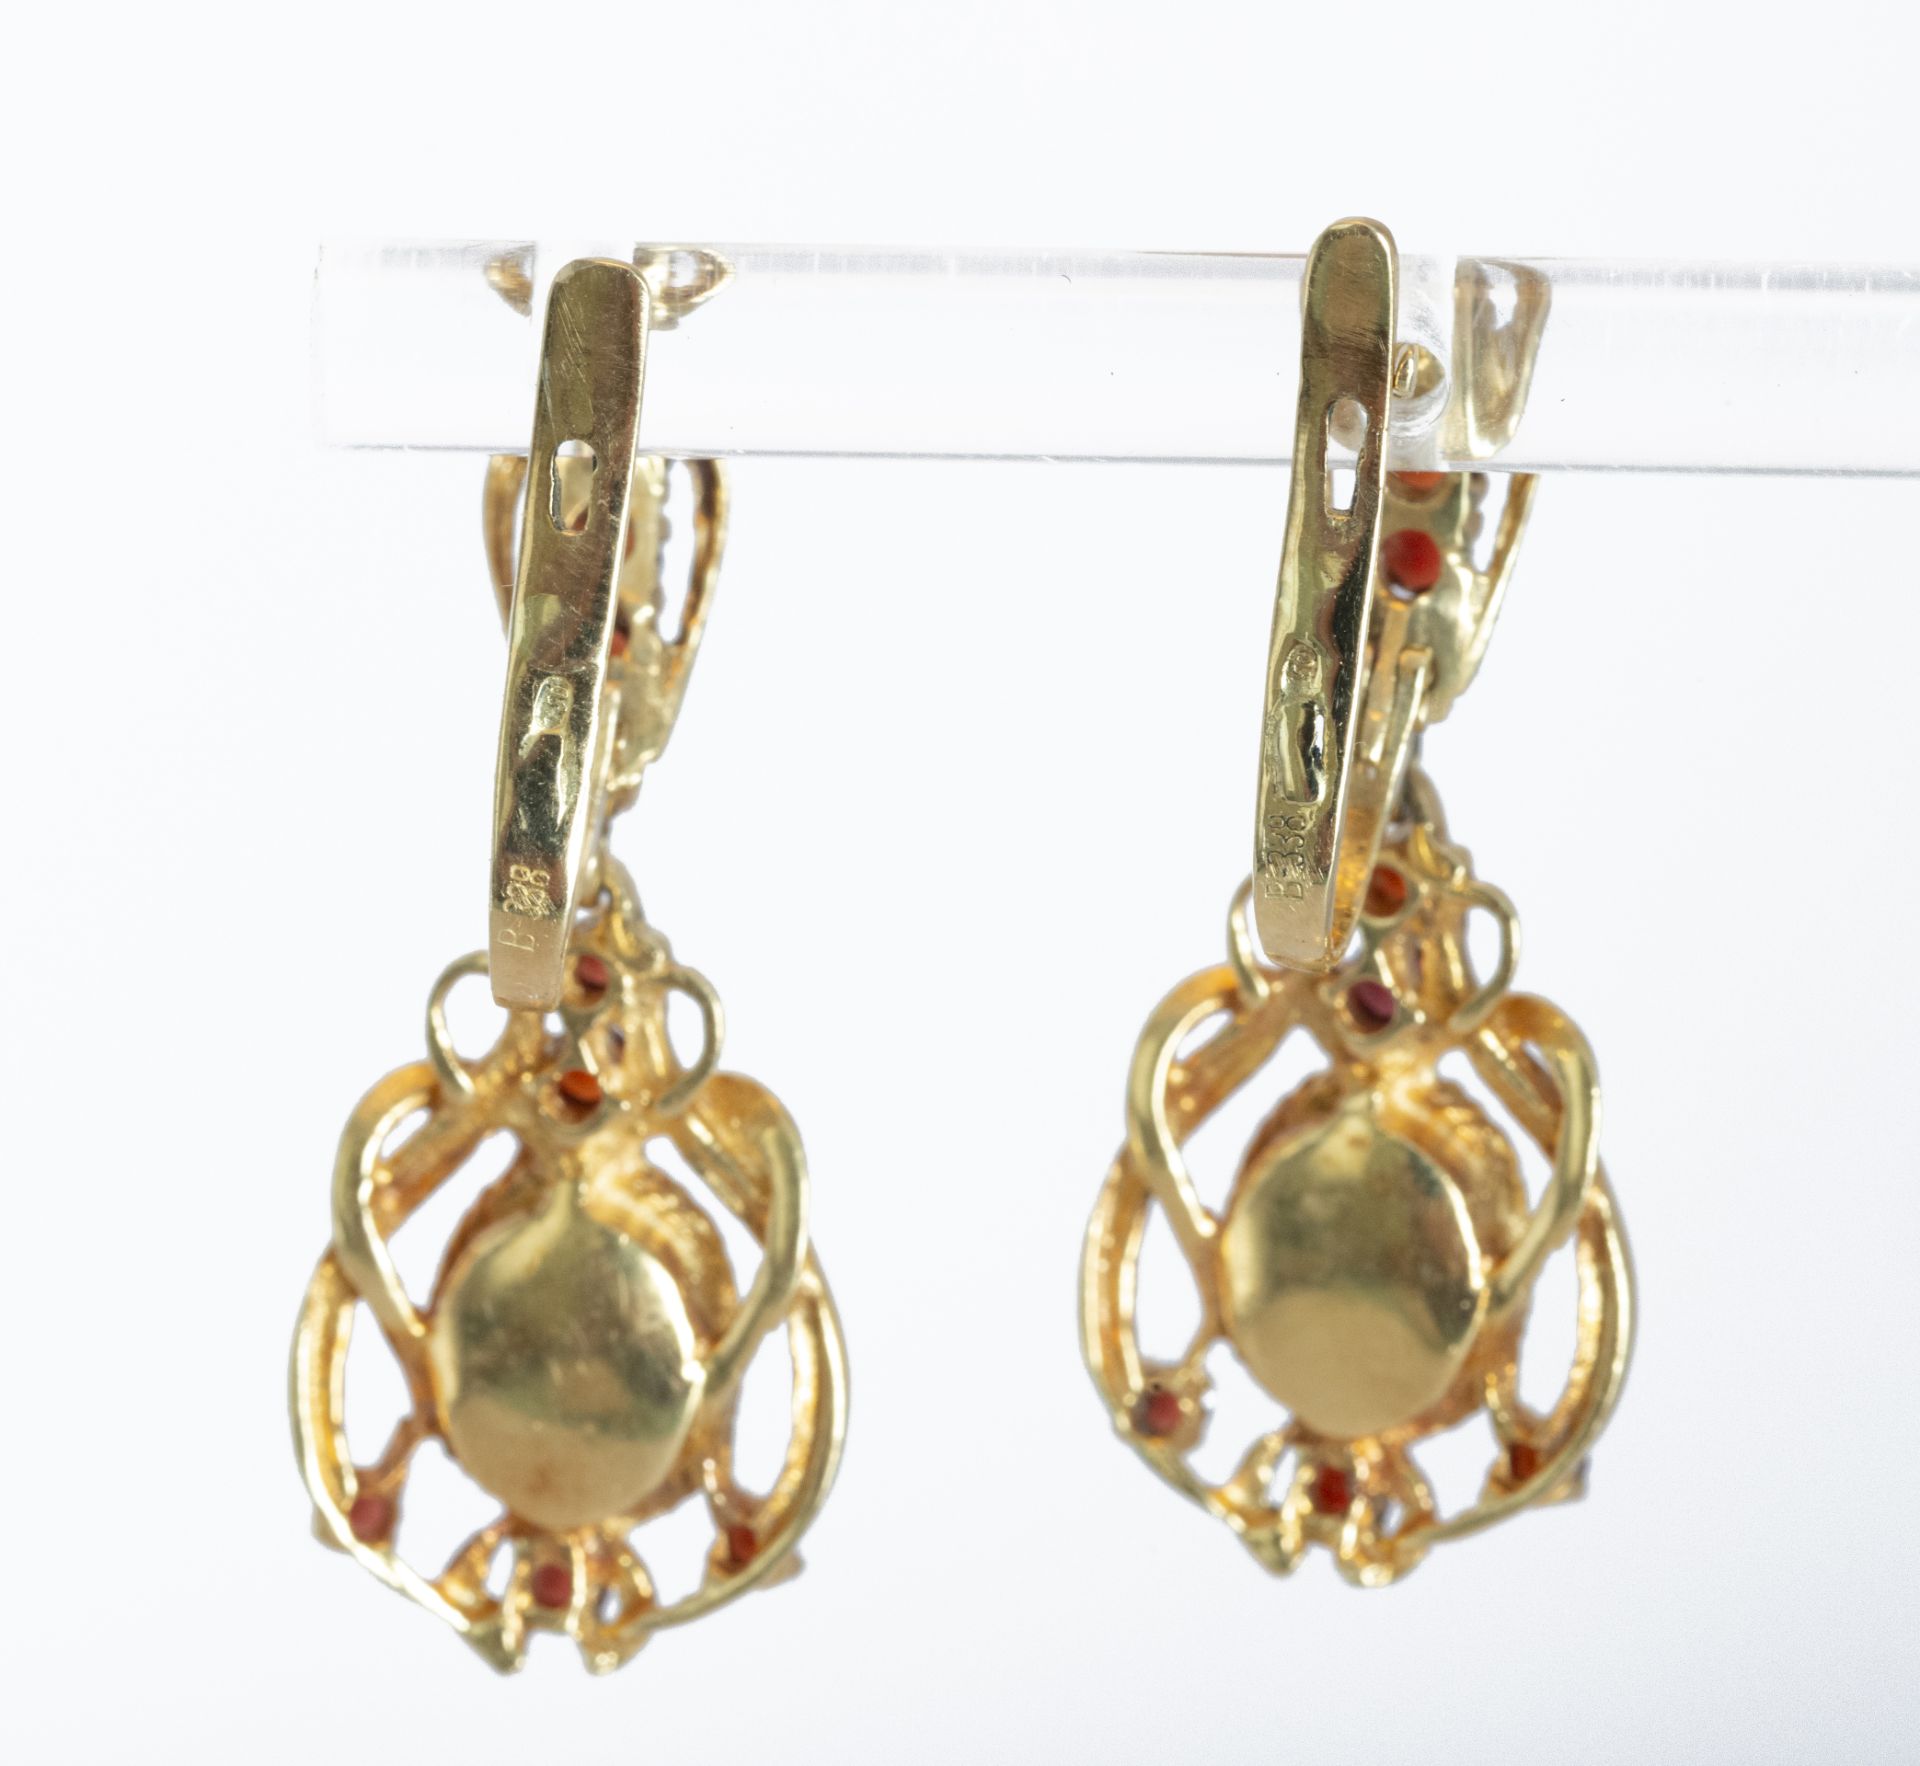 18kt gold earrings with garnets - Image 4 of 4